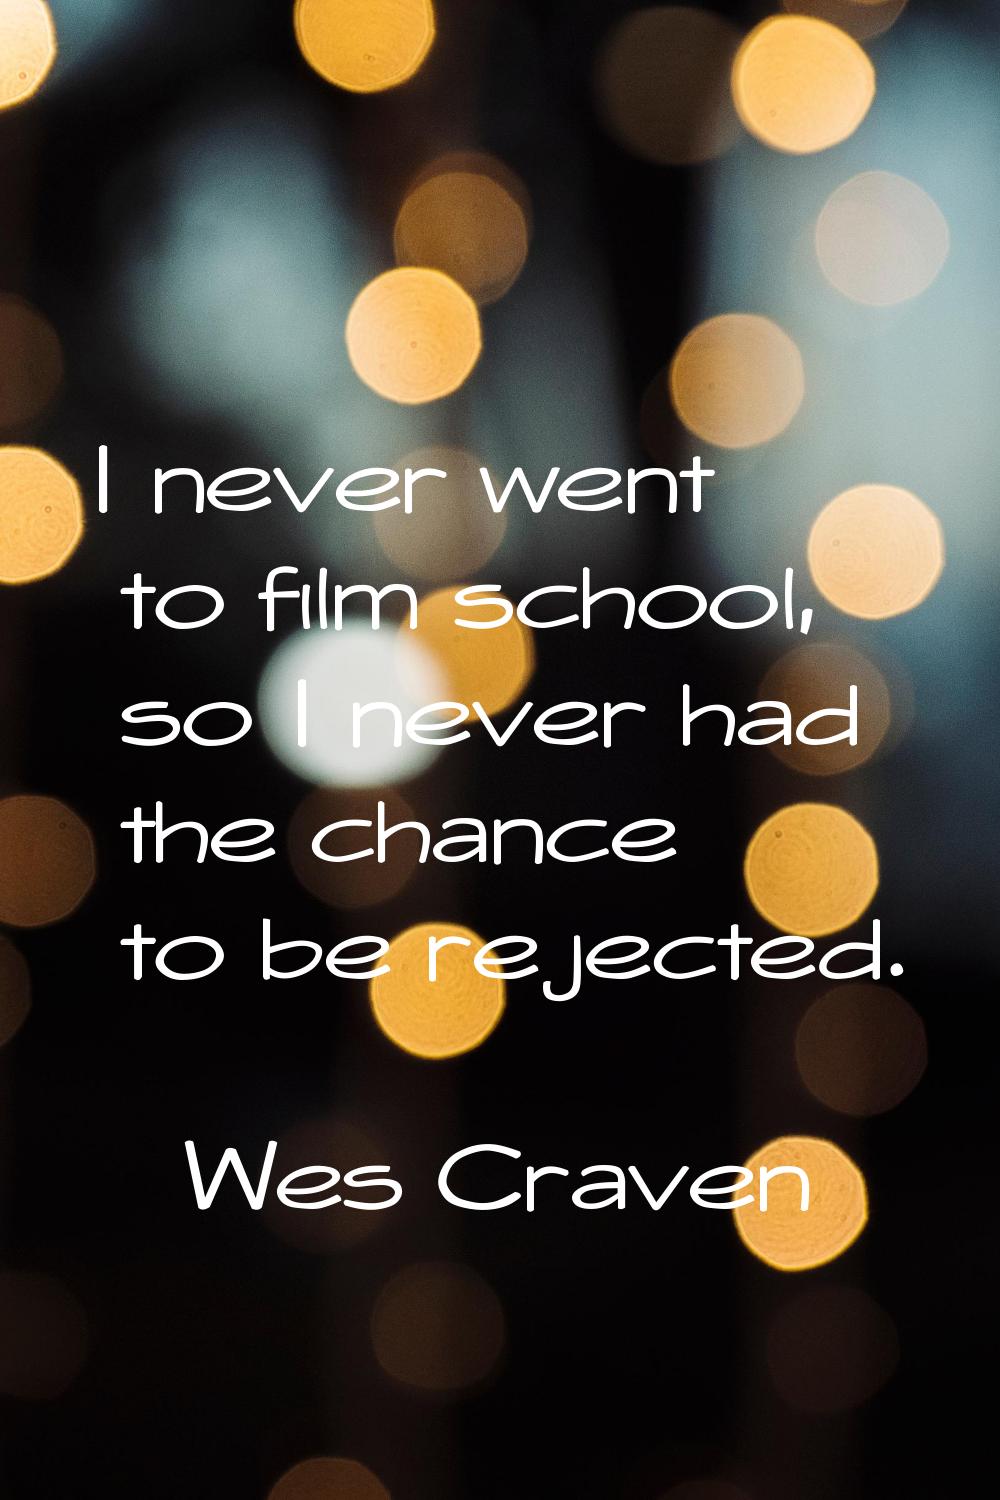 I never went to film school, so I never had the chance to be rejected.